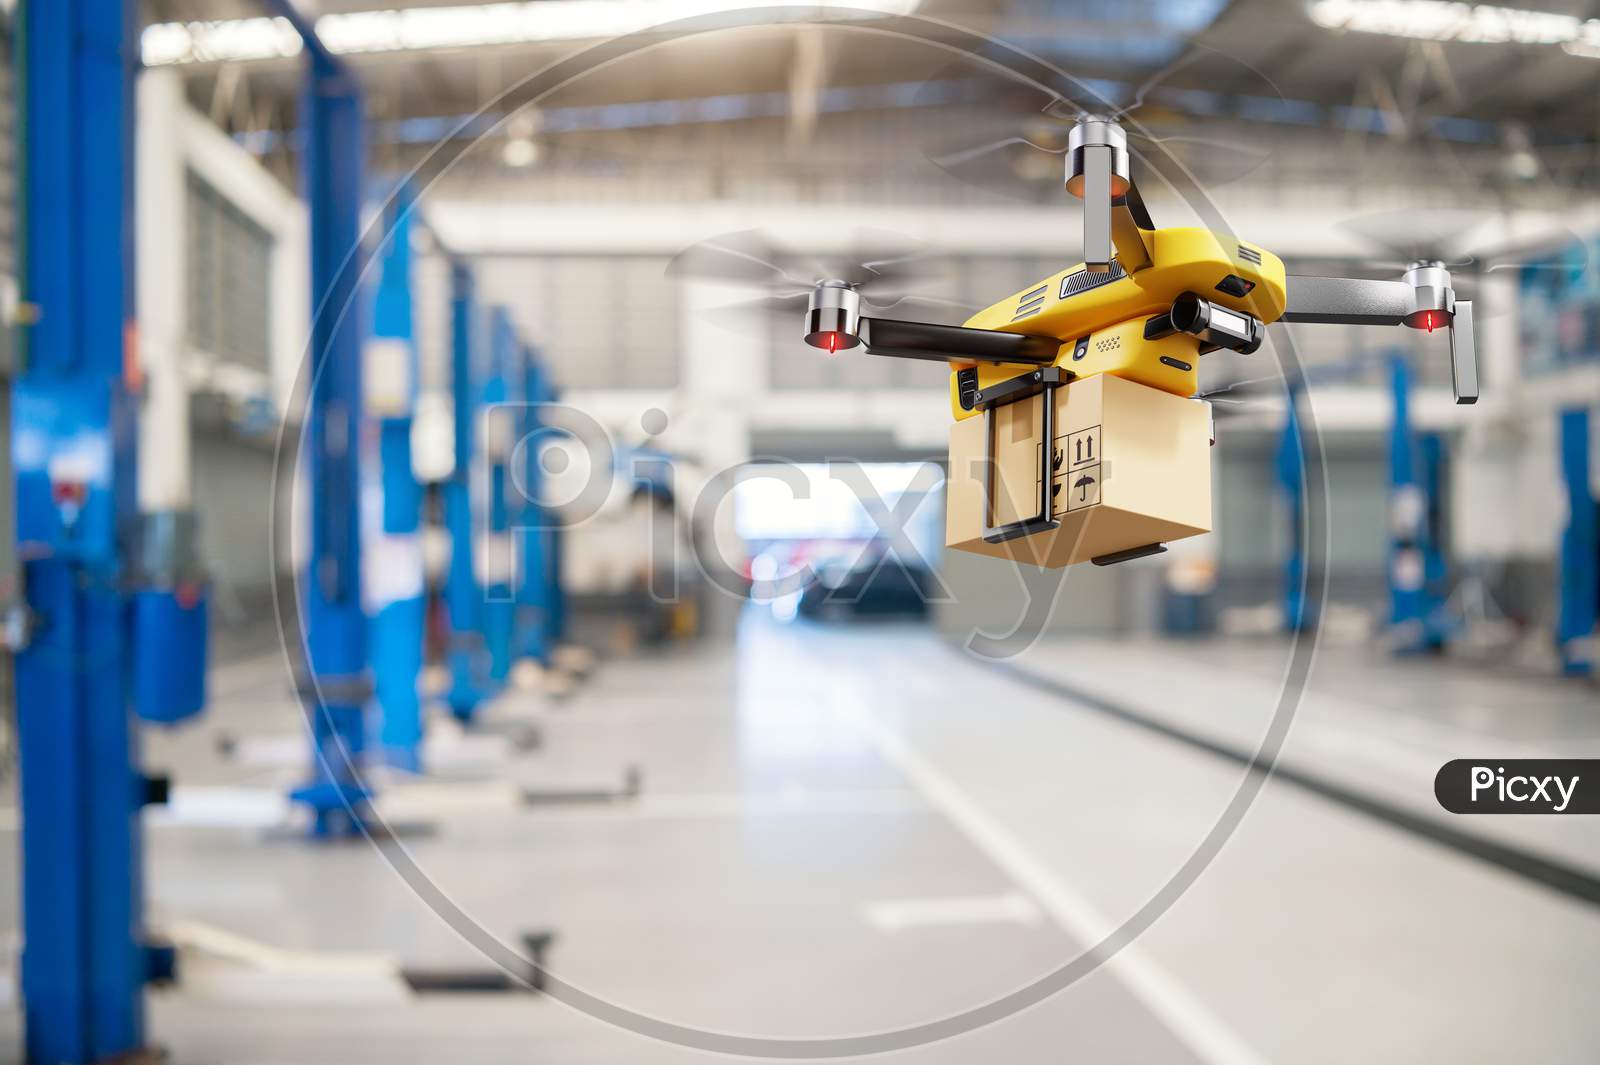 Flying Delivery Drone Transferring Parcel Box From Distribution Warehouse To Automotive Garage Customer Service Repair Center Background. Modern Innovative Technology And Gadget Concept.